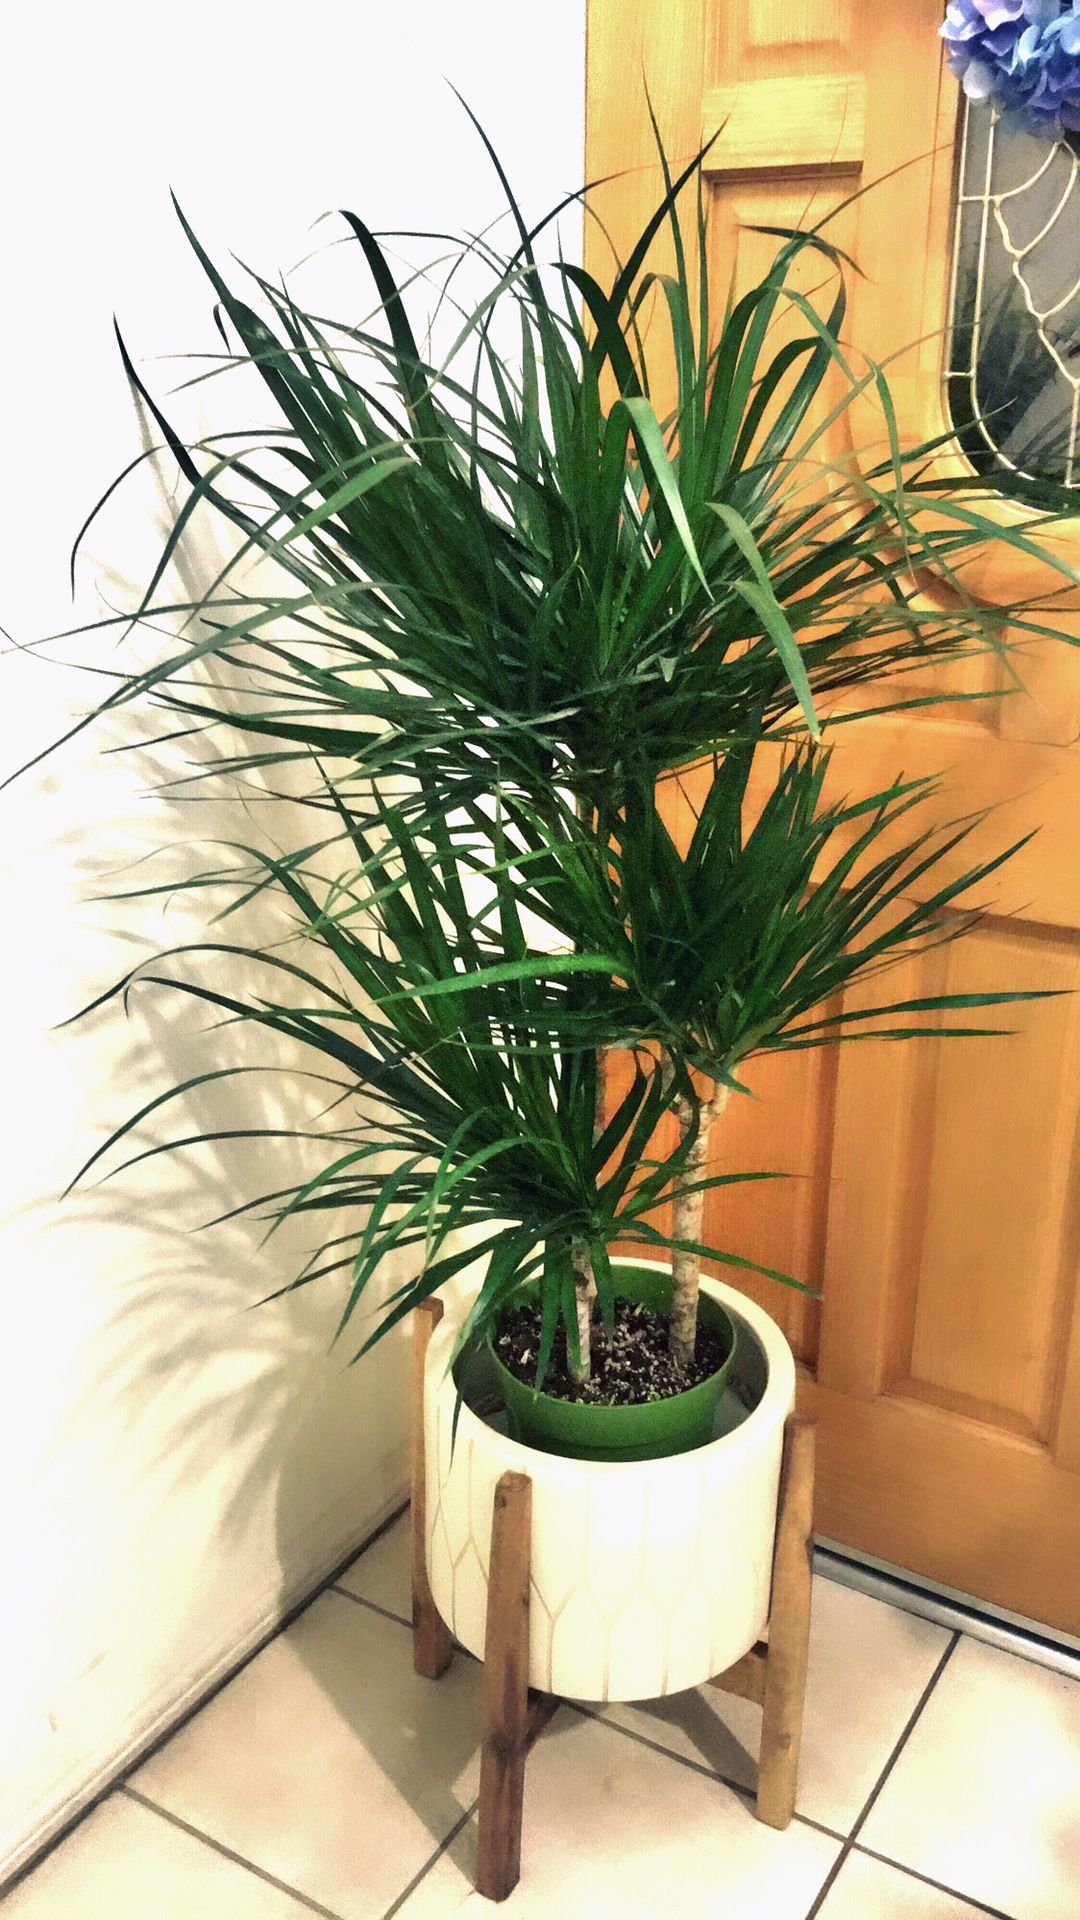 Big 🌱Tall🌱Healthy 🌱and Beautiful Dracaena Marginata Plant - About 4 feet tall - $30 each plant only - Outdoor/Indoor Plant